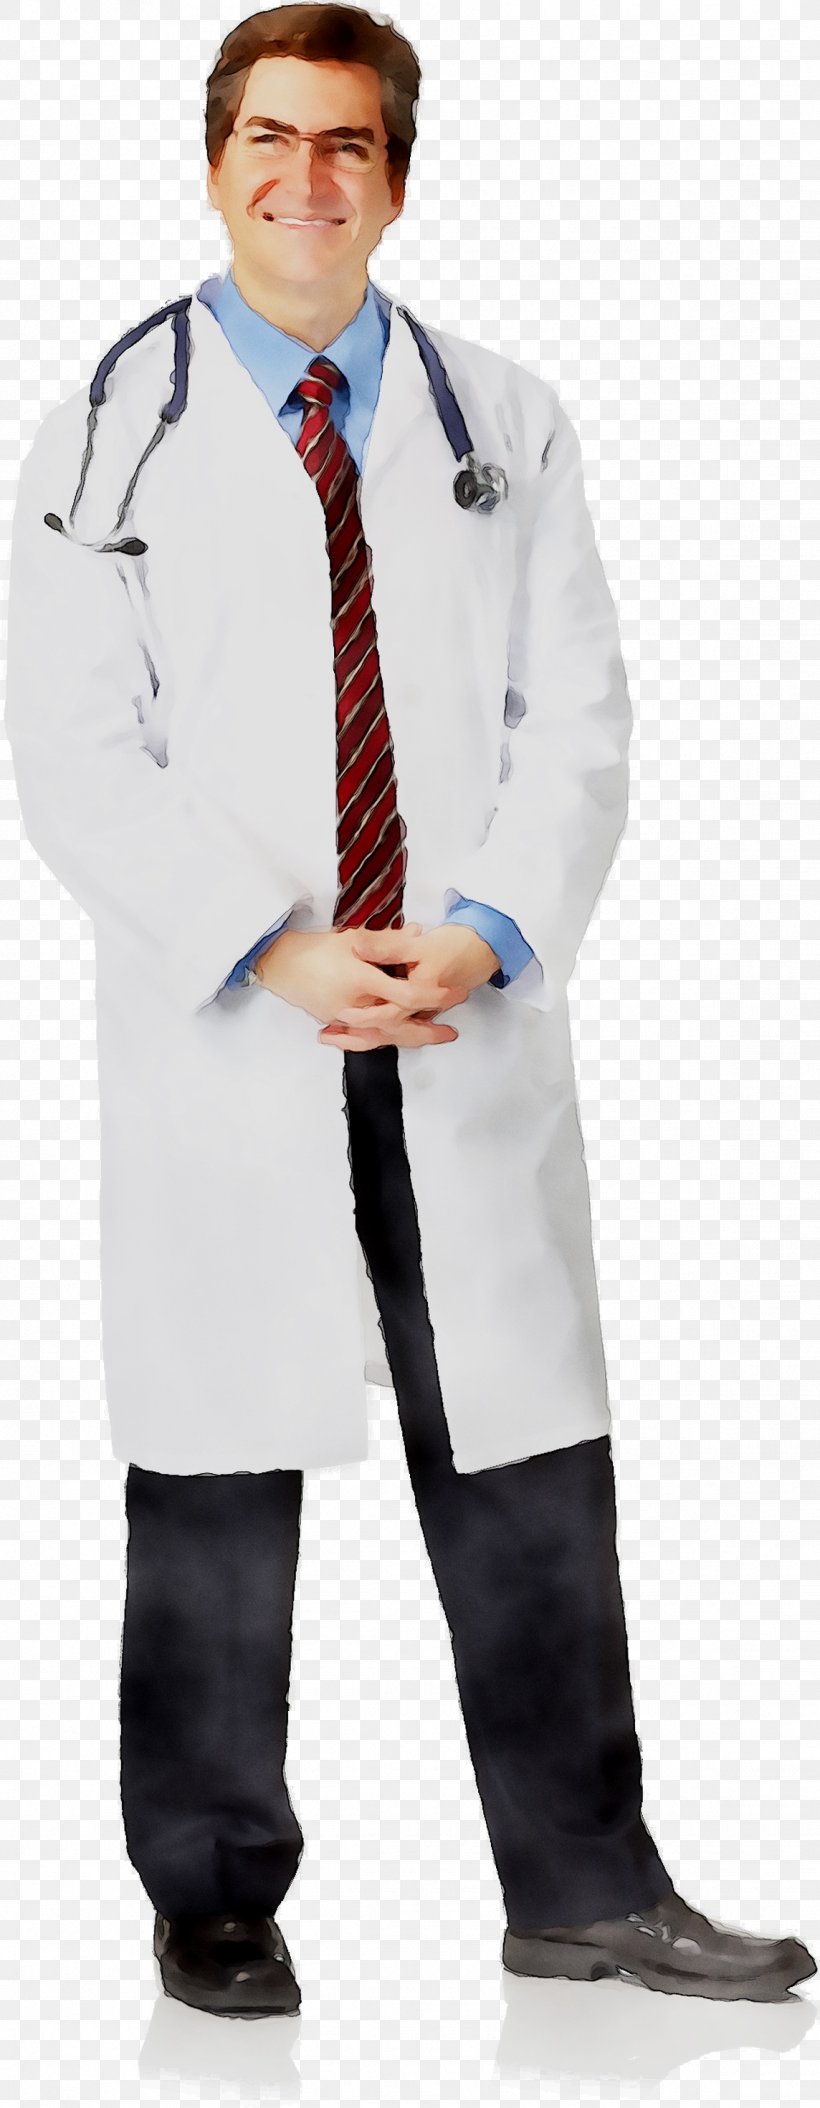 Physician Lab Coats Stethoscope Video, PNG, 1144x2942px, Physician, Clothing, Coat, Costume, Formal Wear Download Free